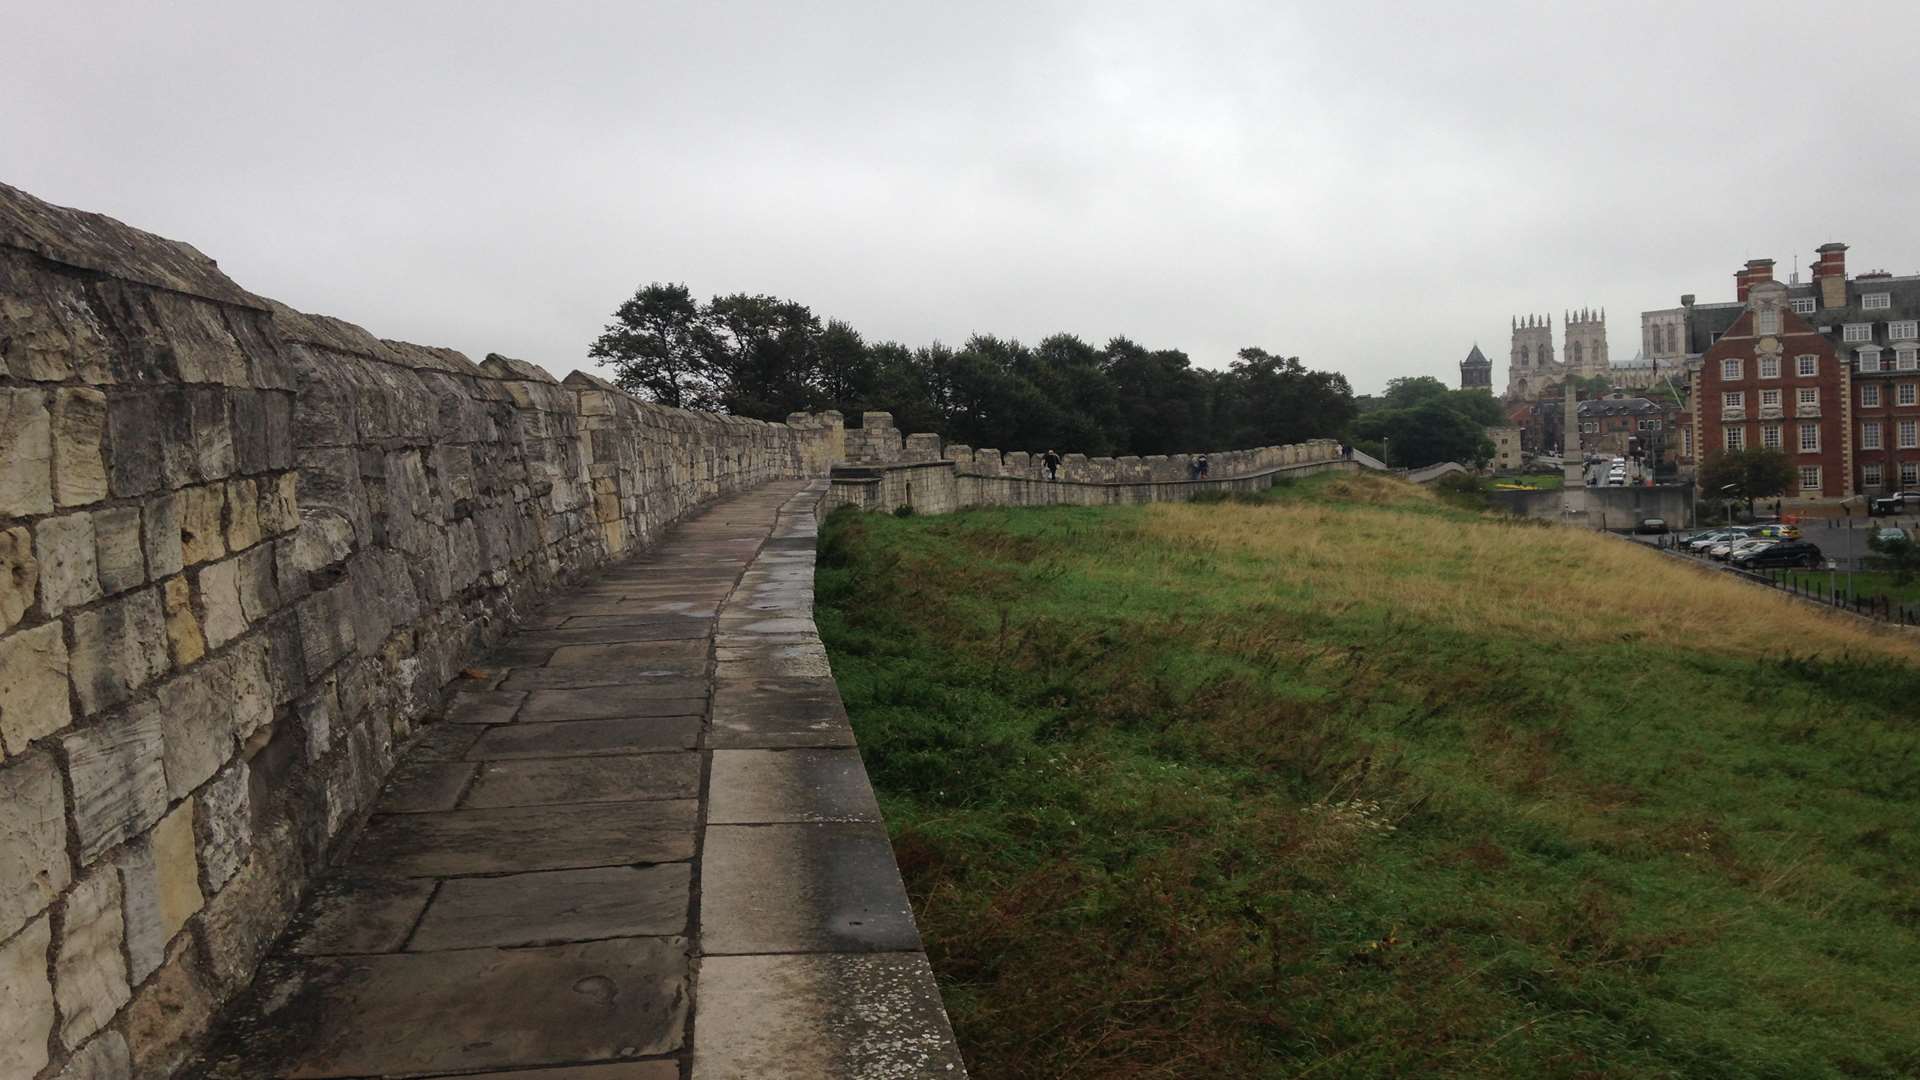 The famous York city walls.